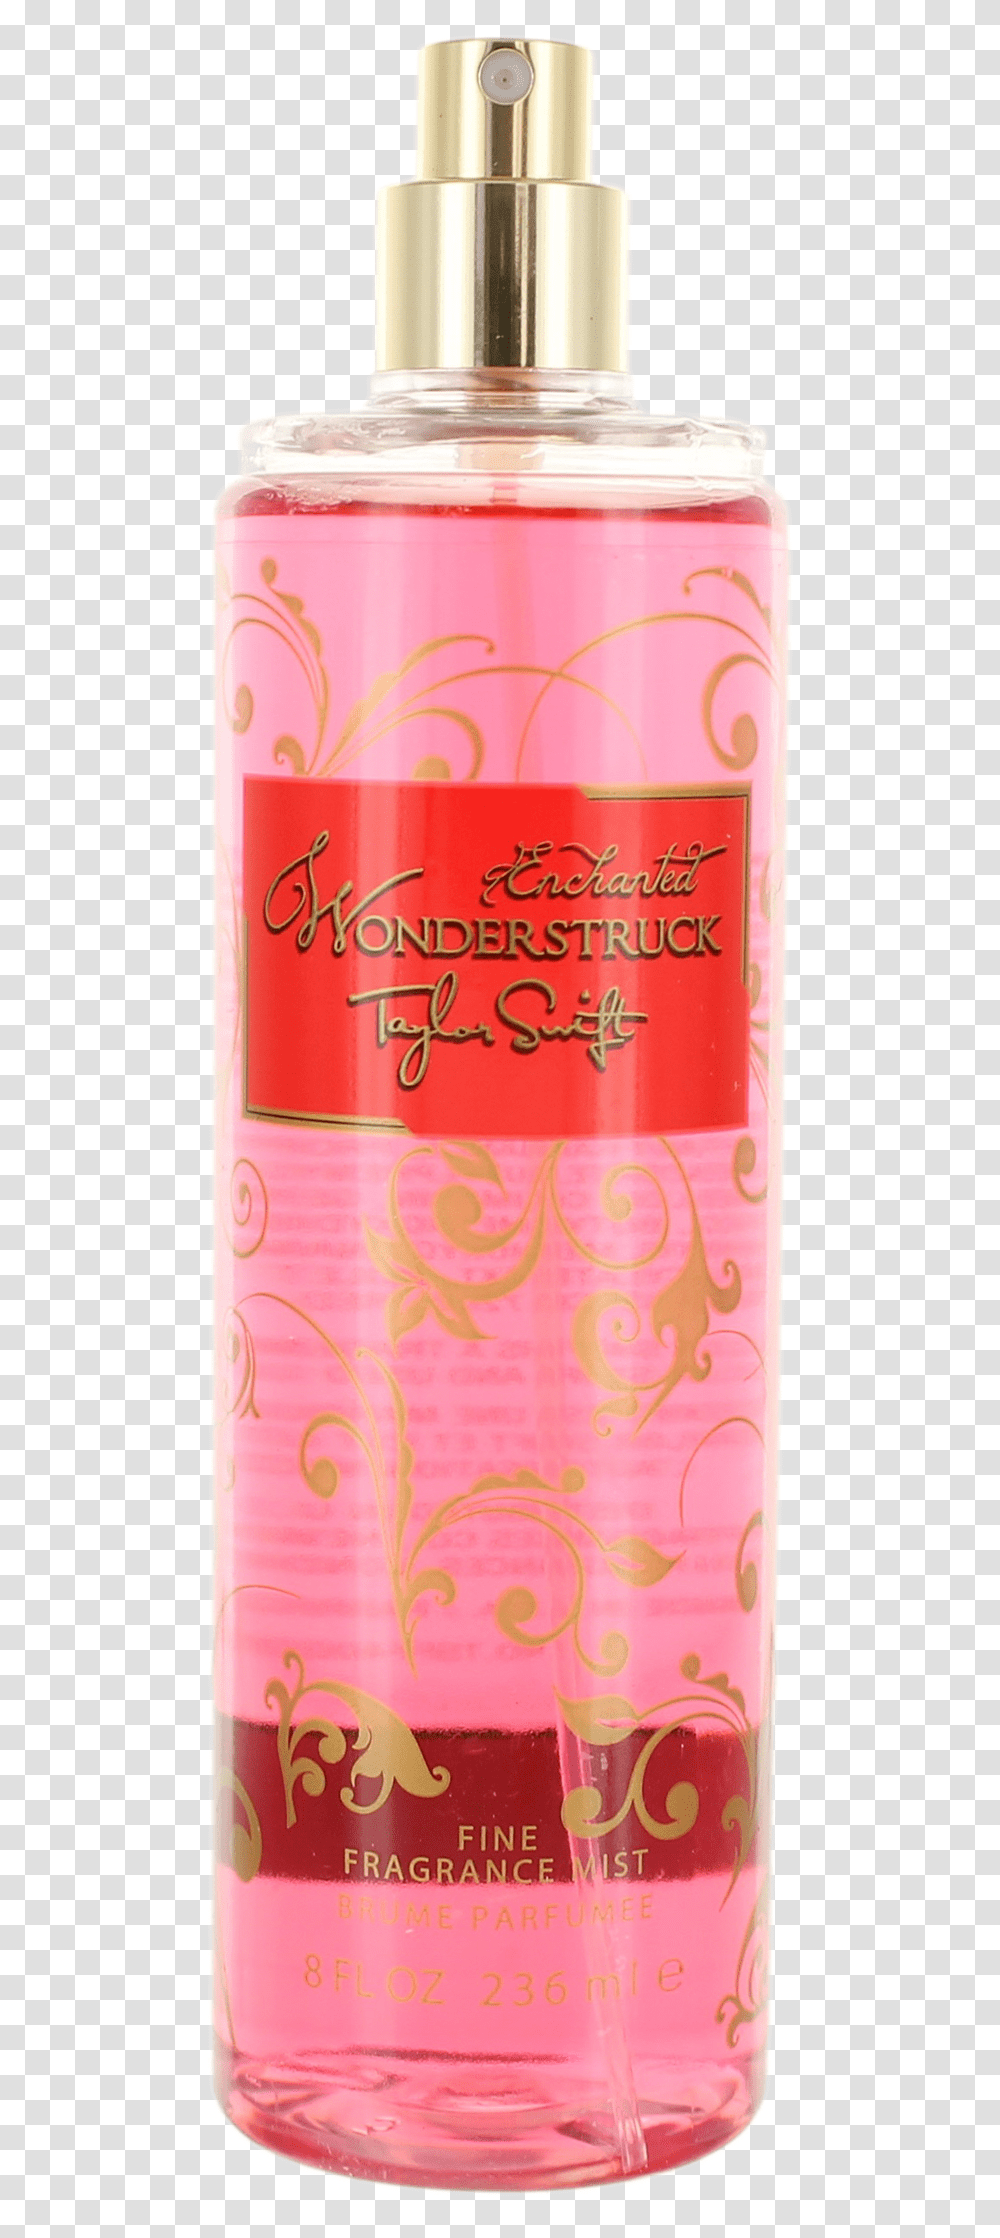 Enchanted Wonderstruck By Taylor Swift For Women Body Bottle, Tin, Can, Aluminium, Spray Can Transparent Png